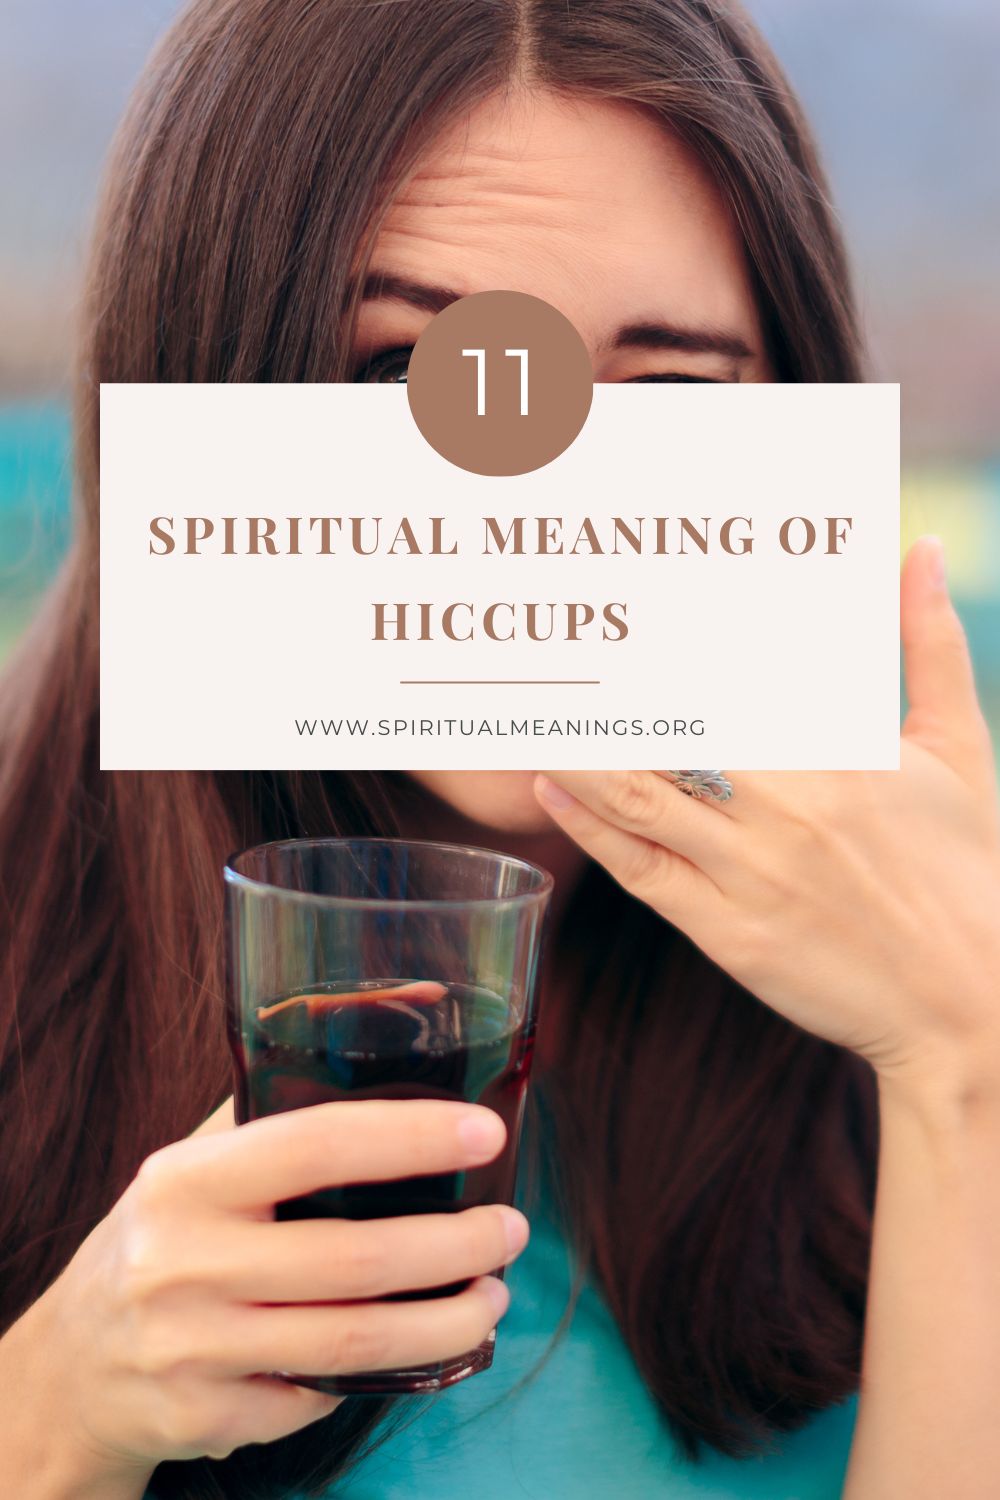 Hiccups Spiritual Meanings pin 2